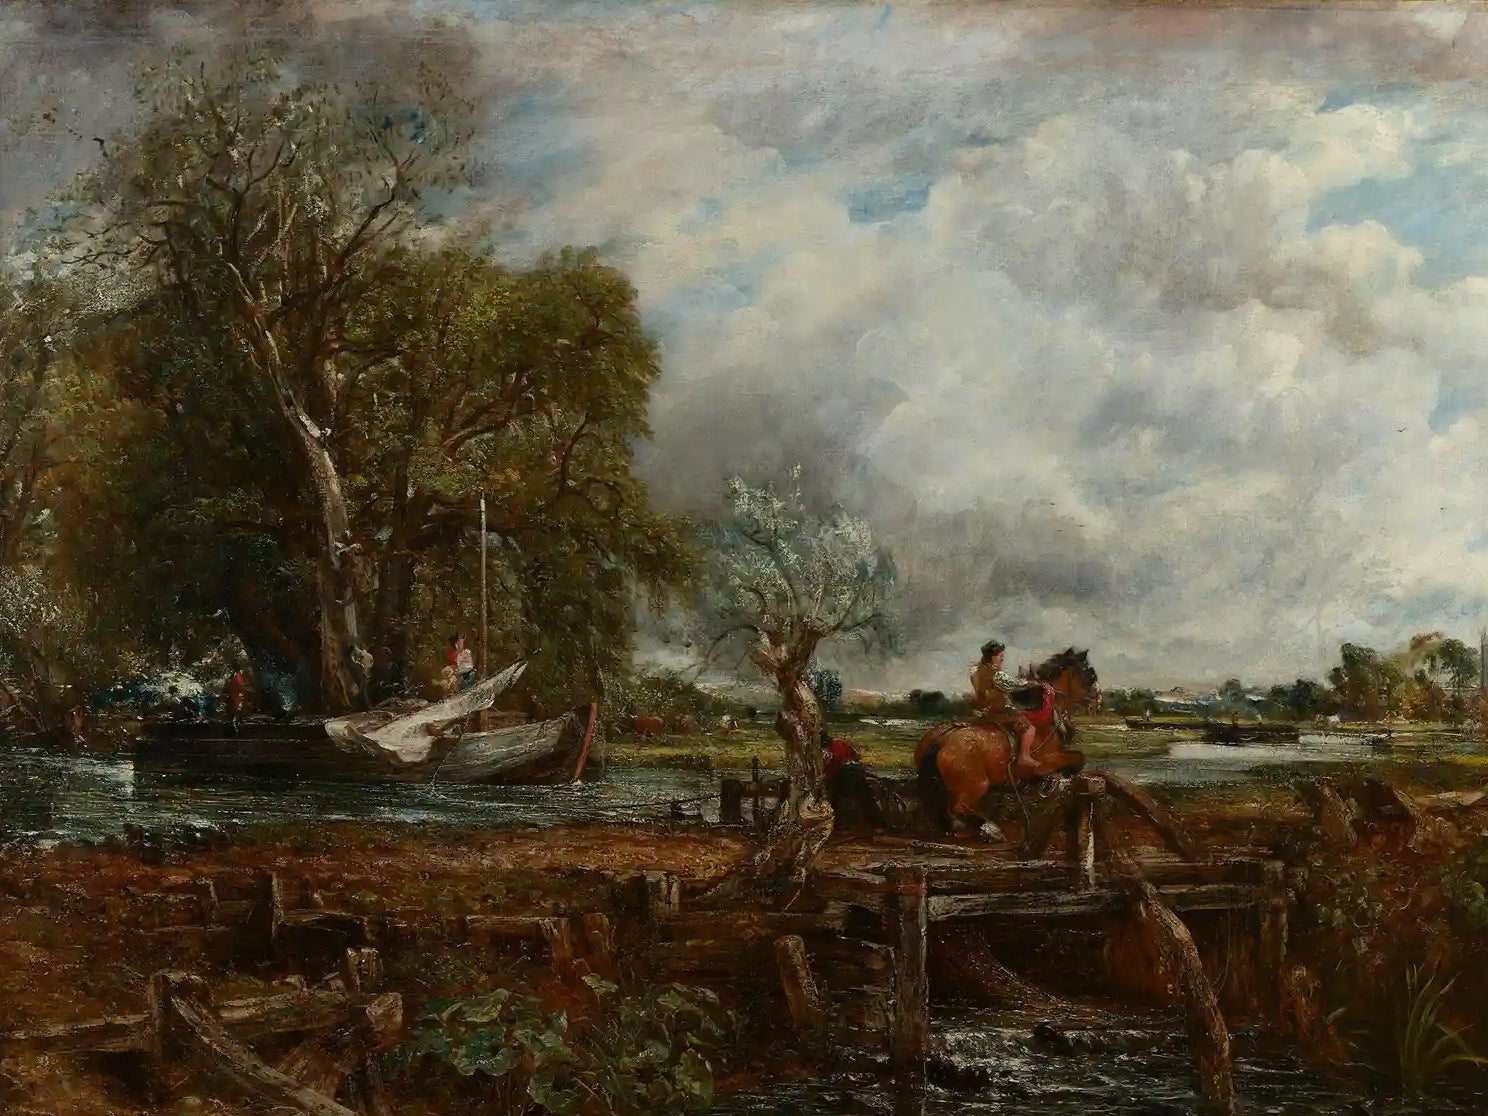 John Constable’s ‘The Leaping Horse’ features in new Royal Academy show Late Constable